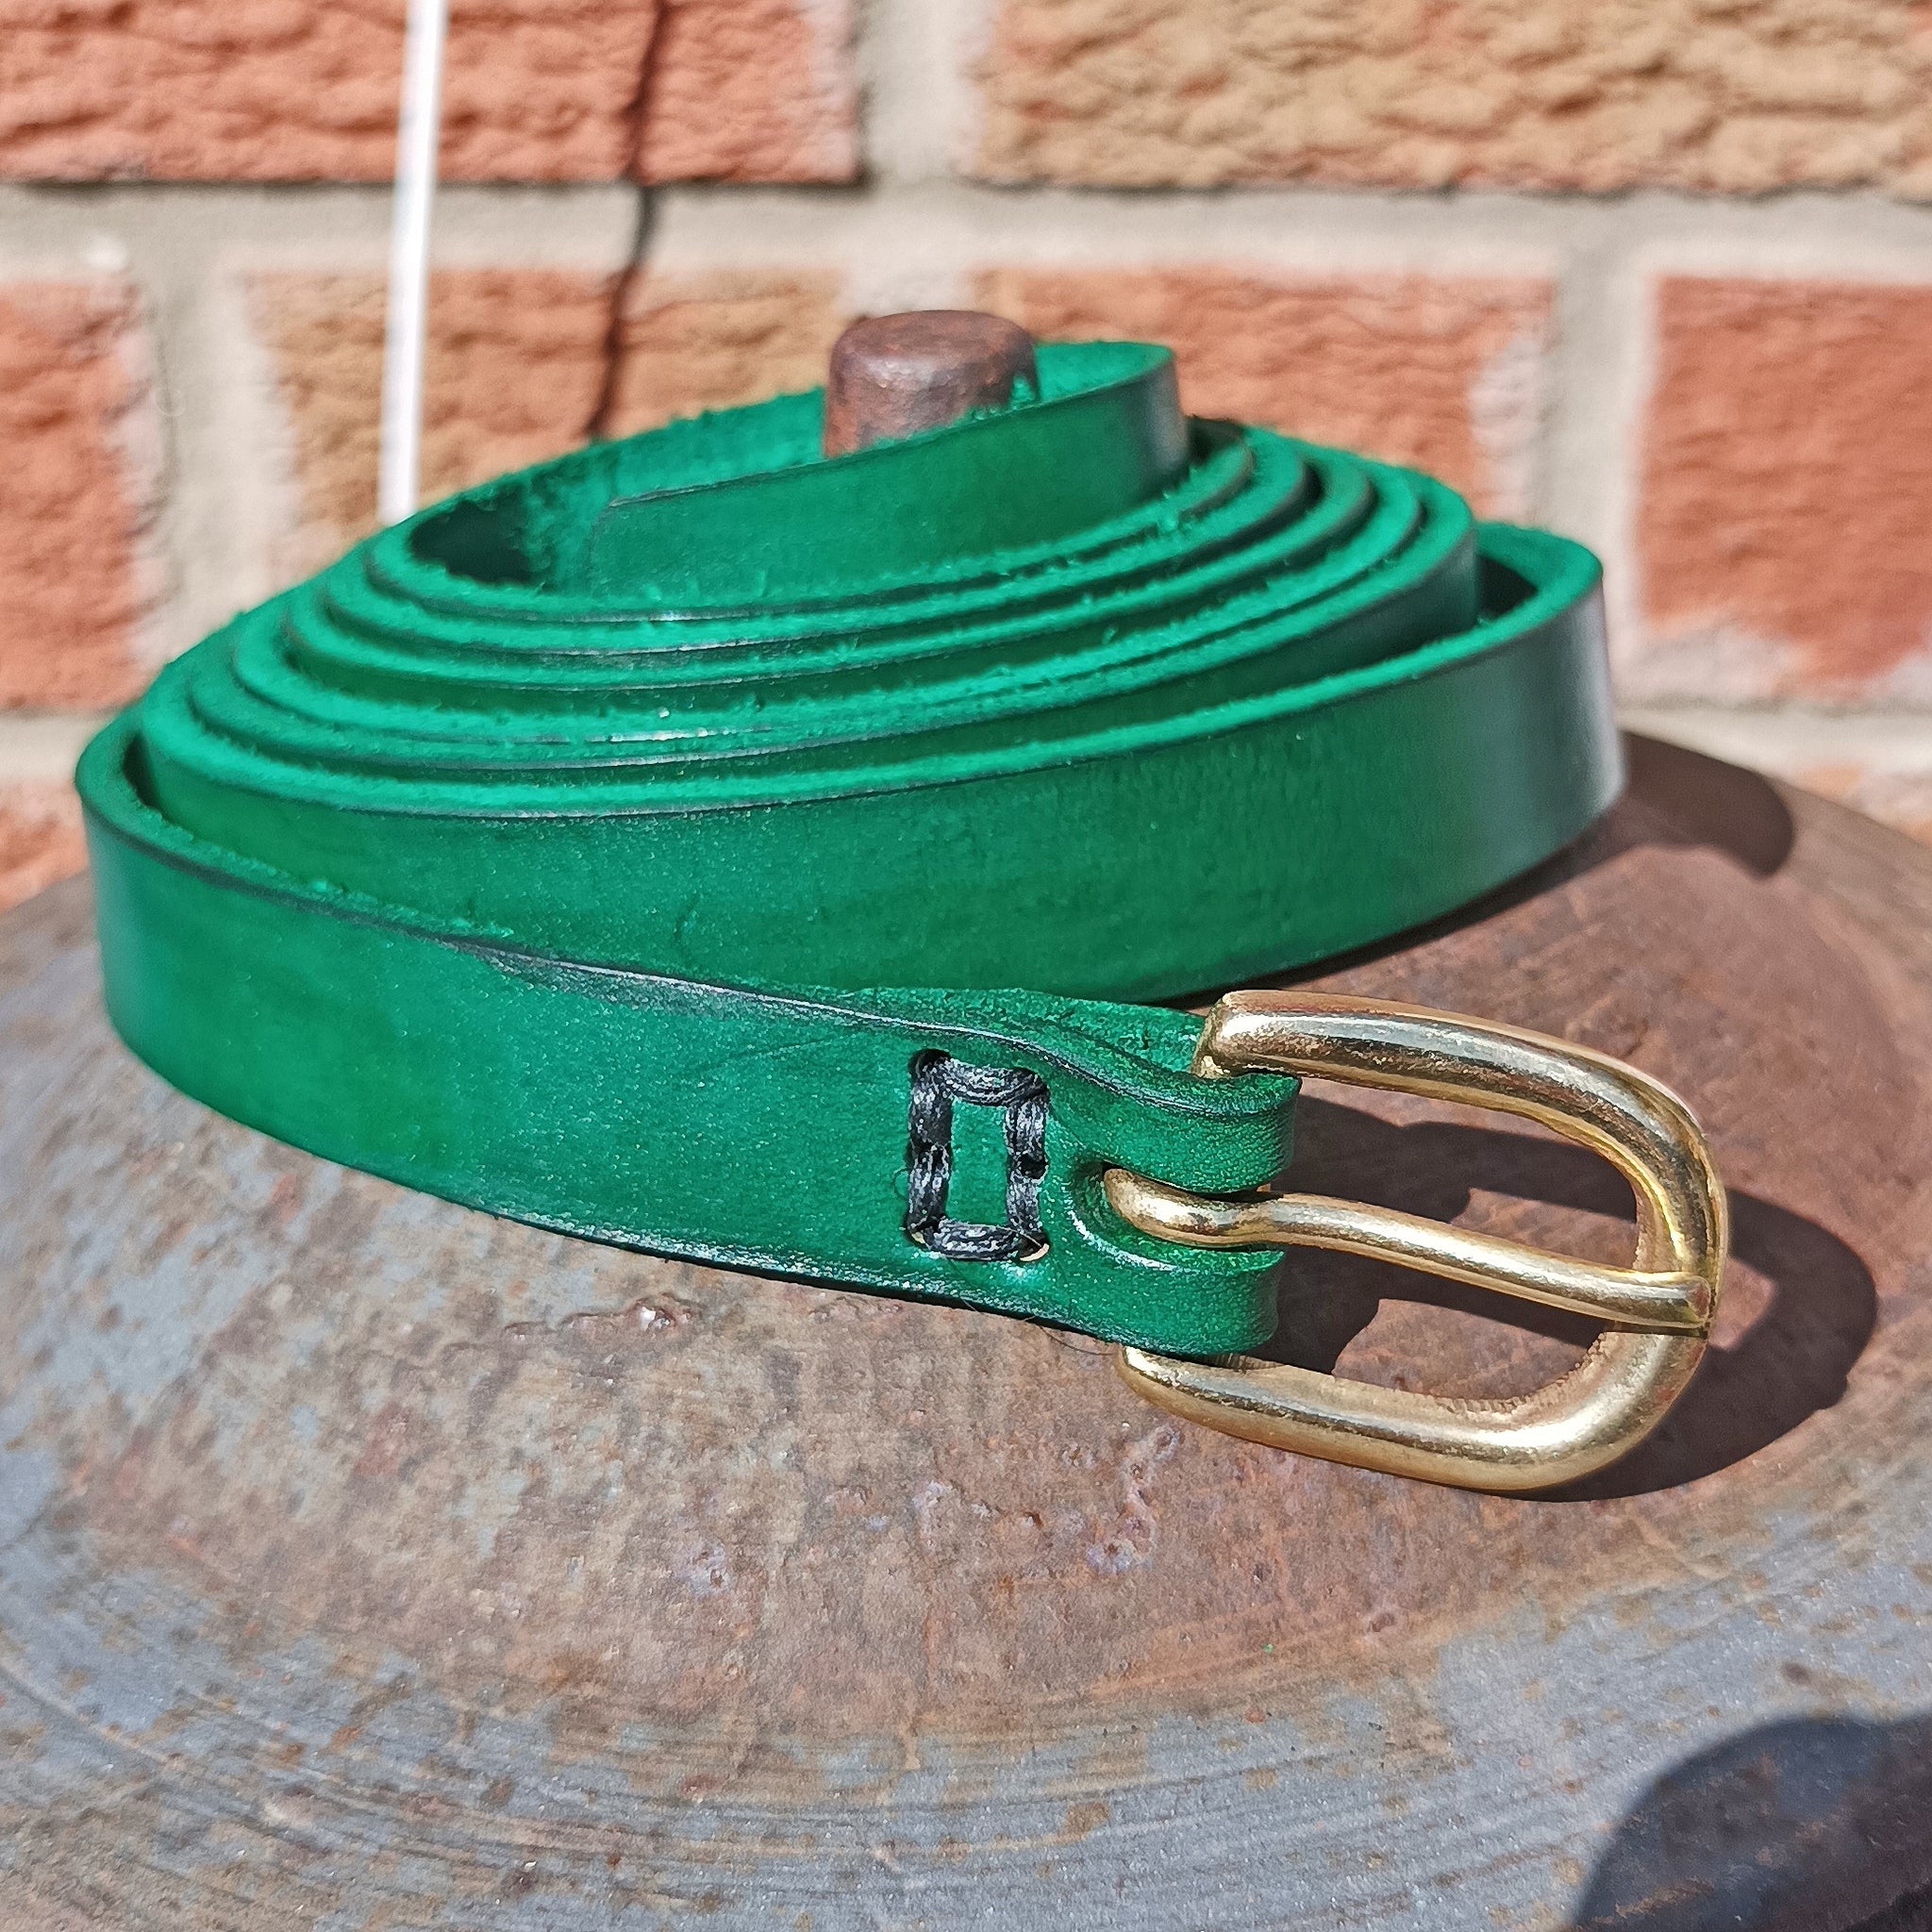 Green Leather Viking Belt with 20mm (3/4 inch) Brass Buckle